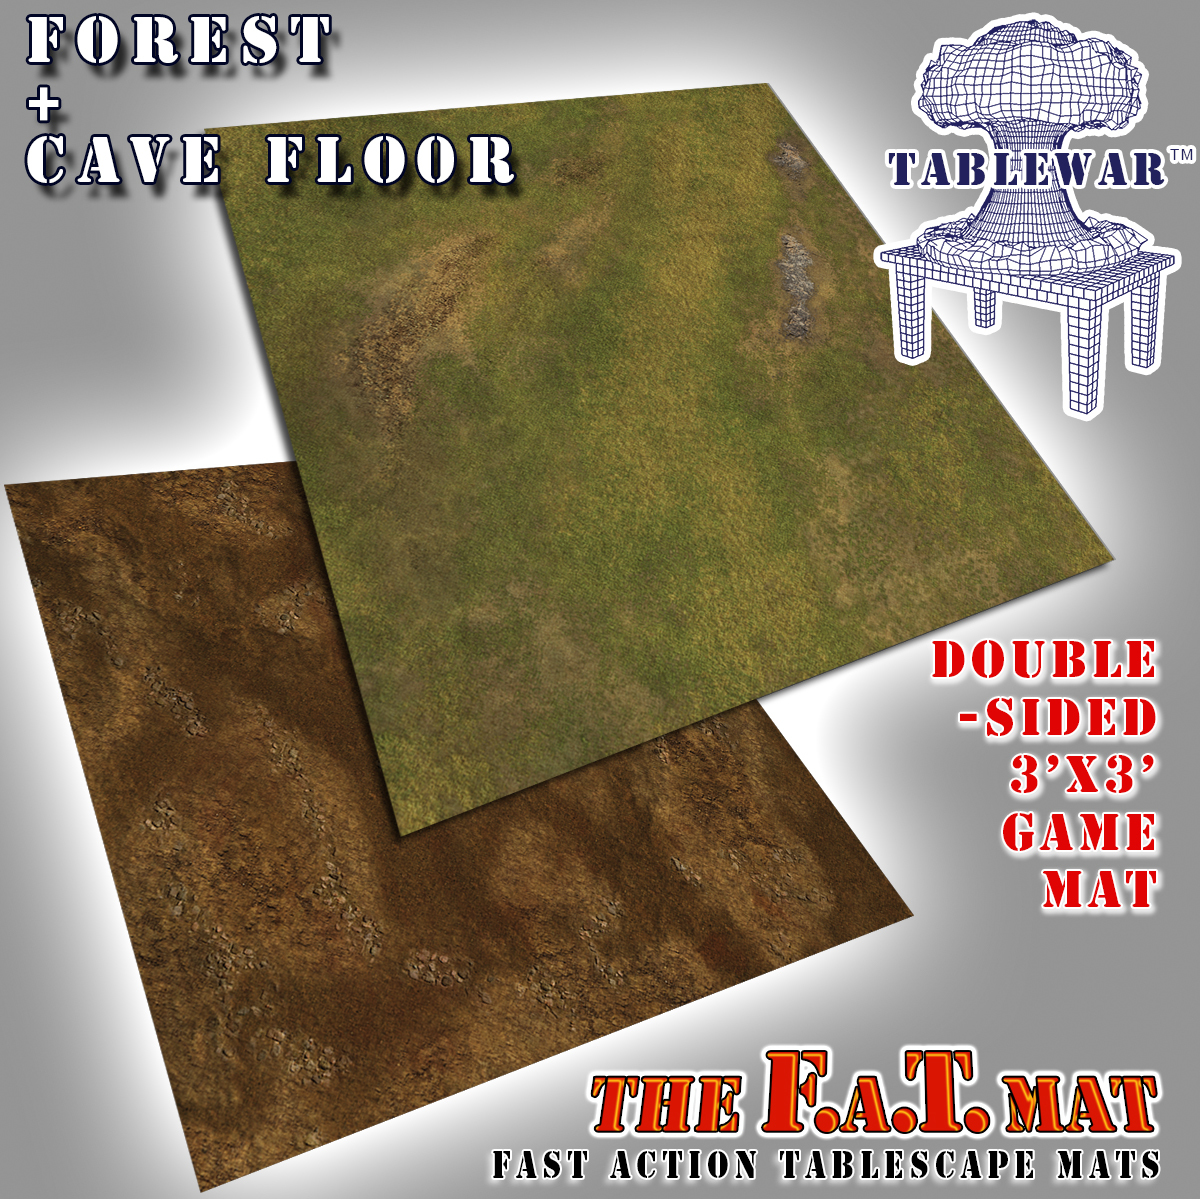 F.A.T. Mats: Forest + Cave Floor 3×3  